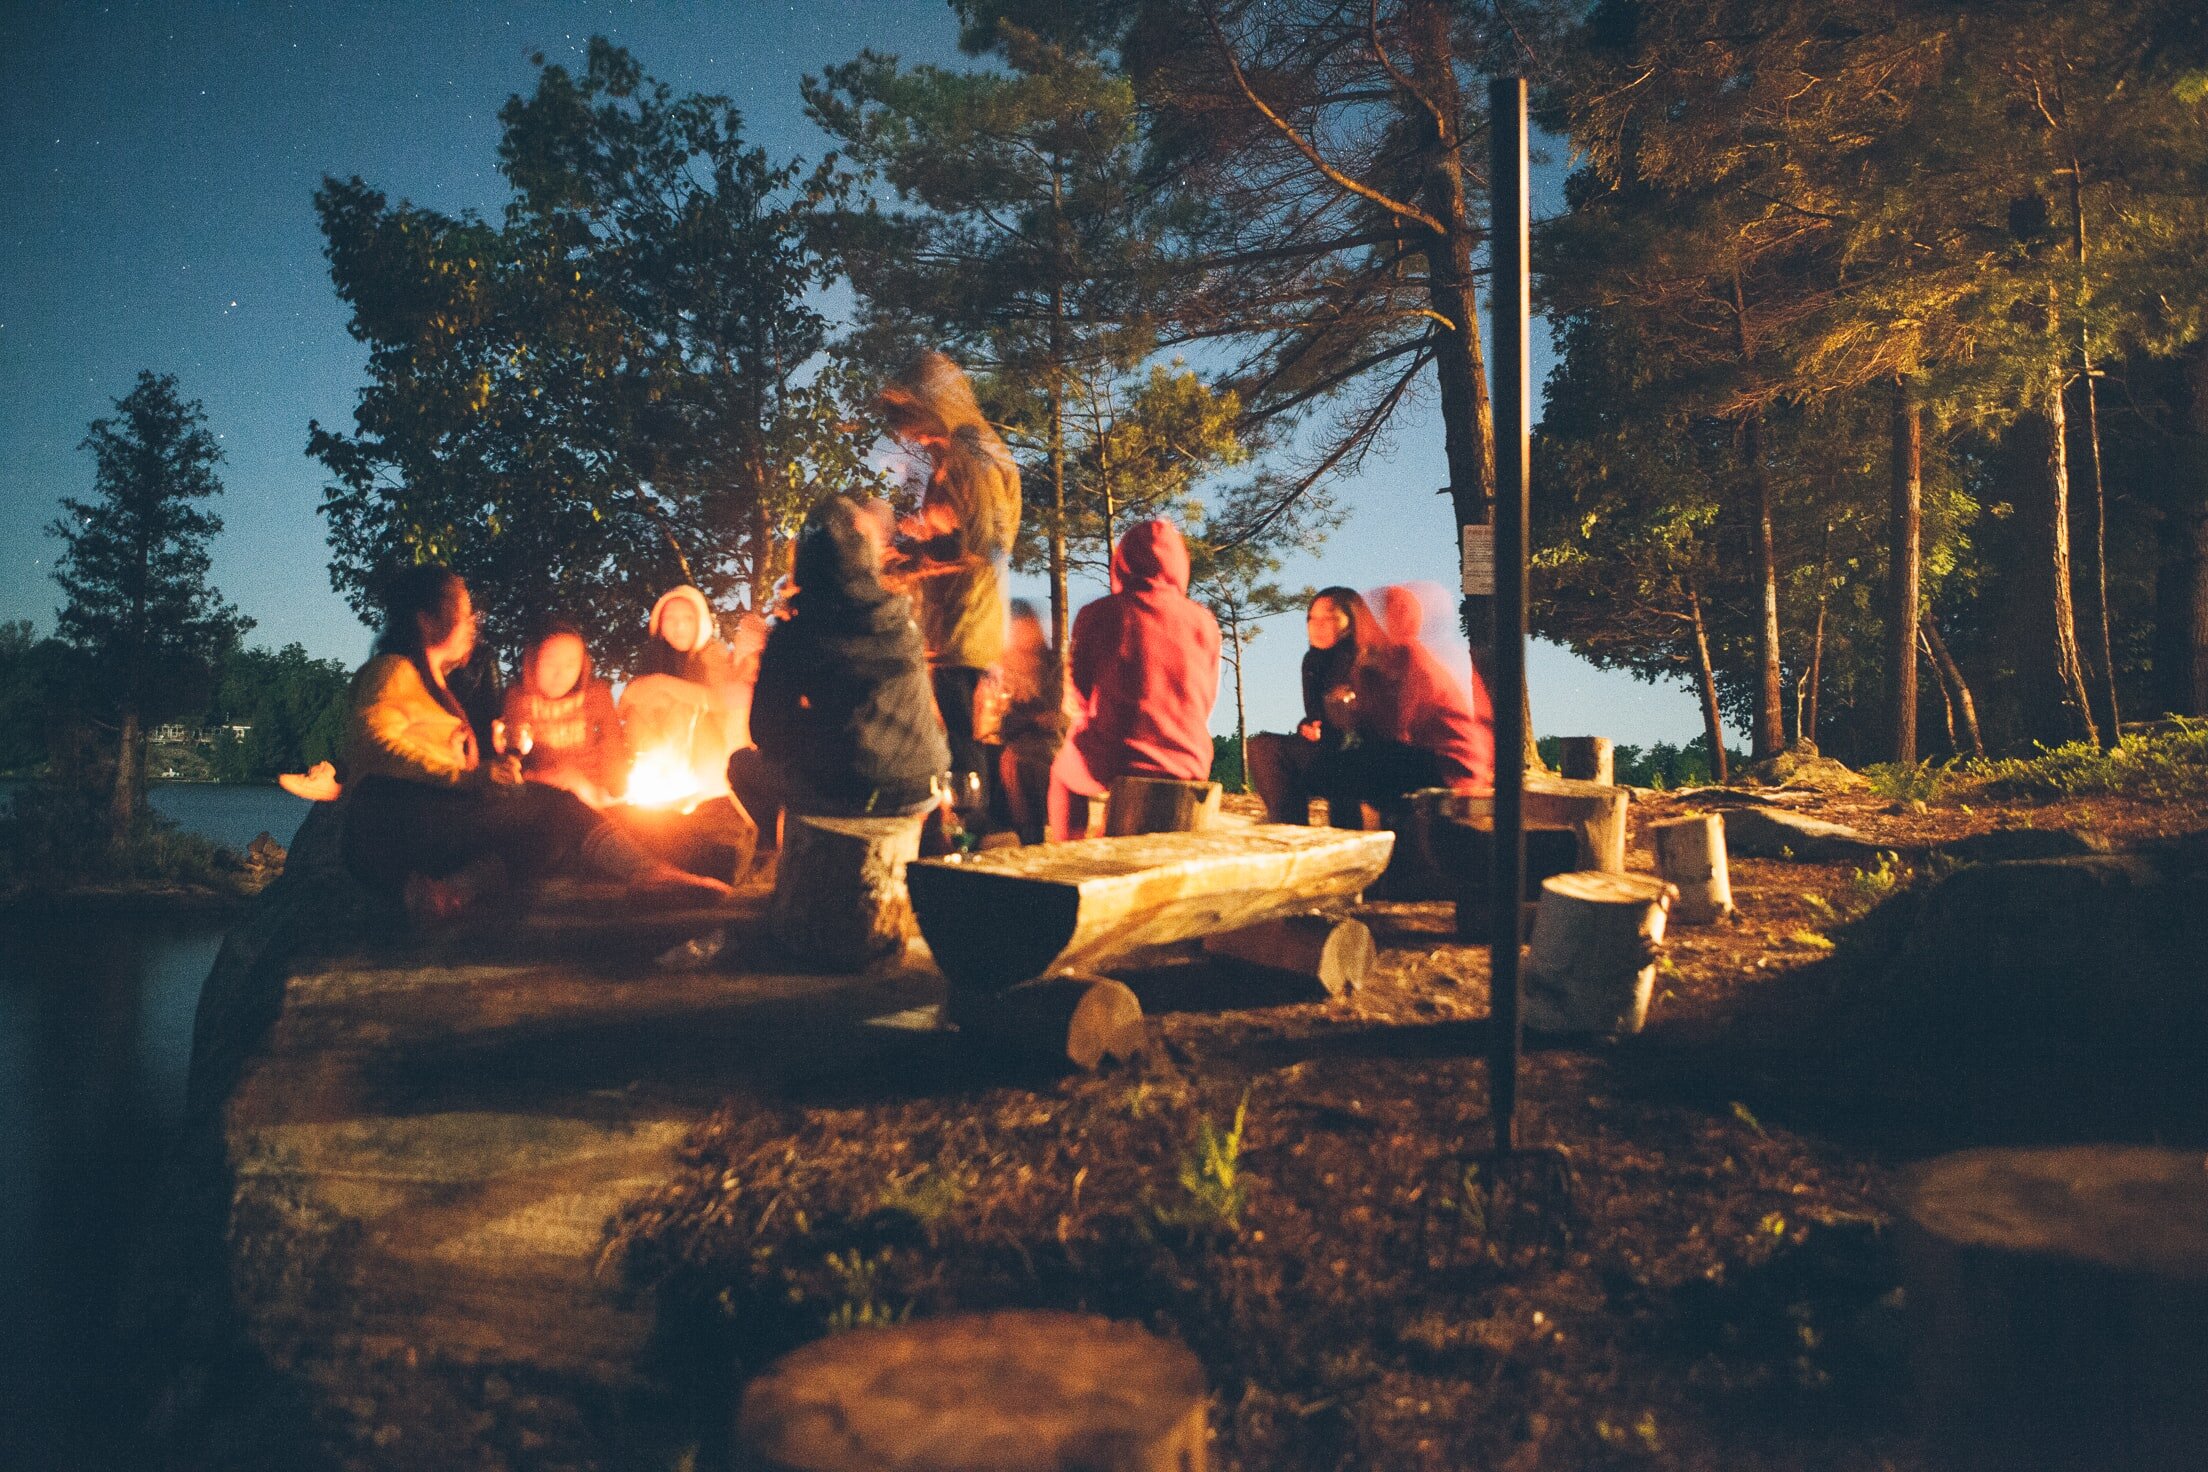 We love friends and camping and campfires at 10K Dollar Day!